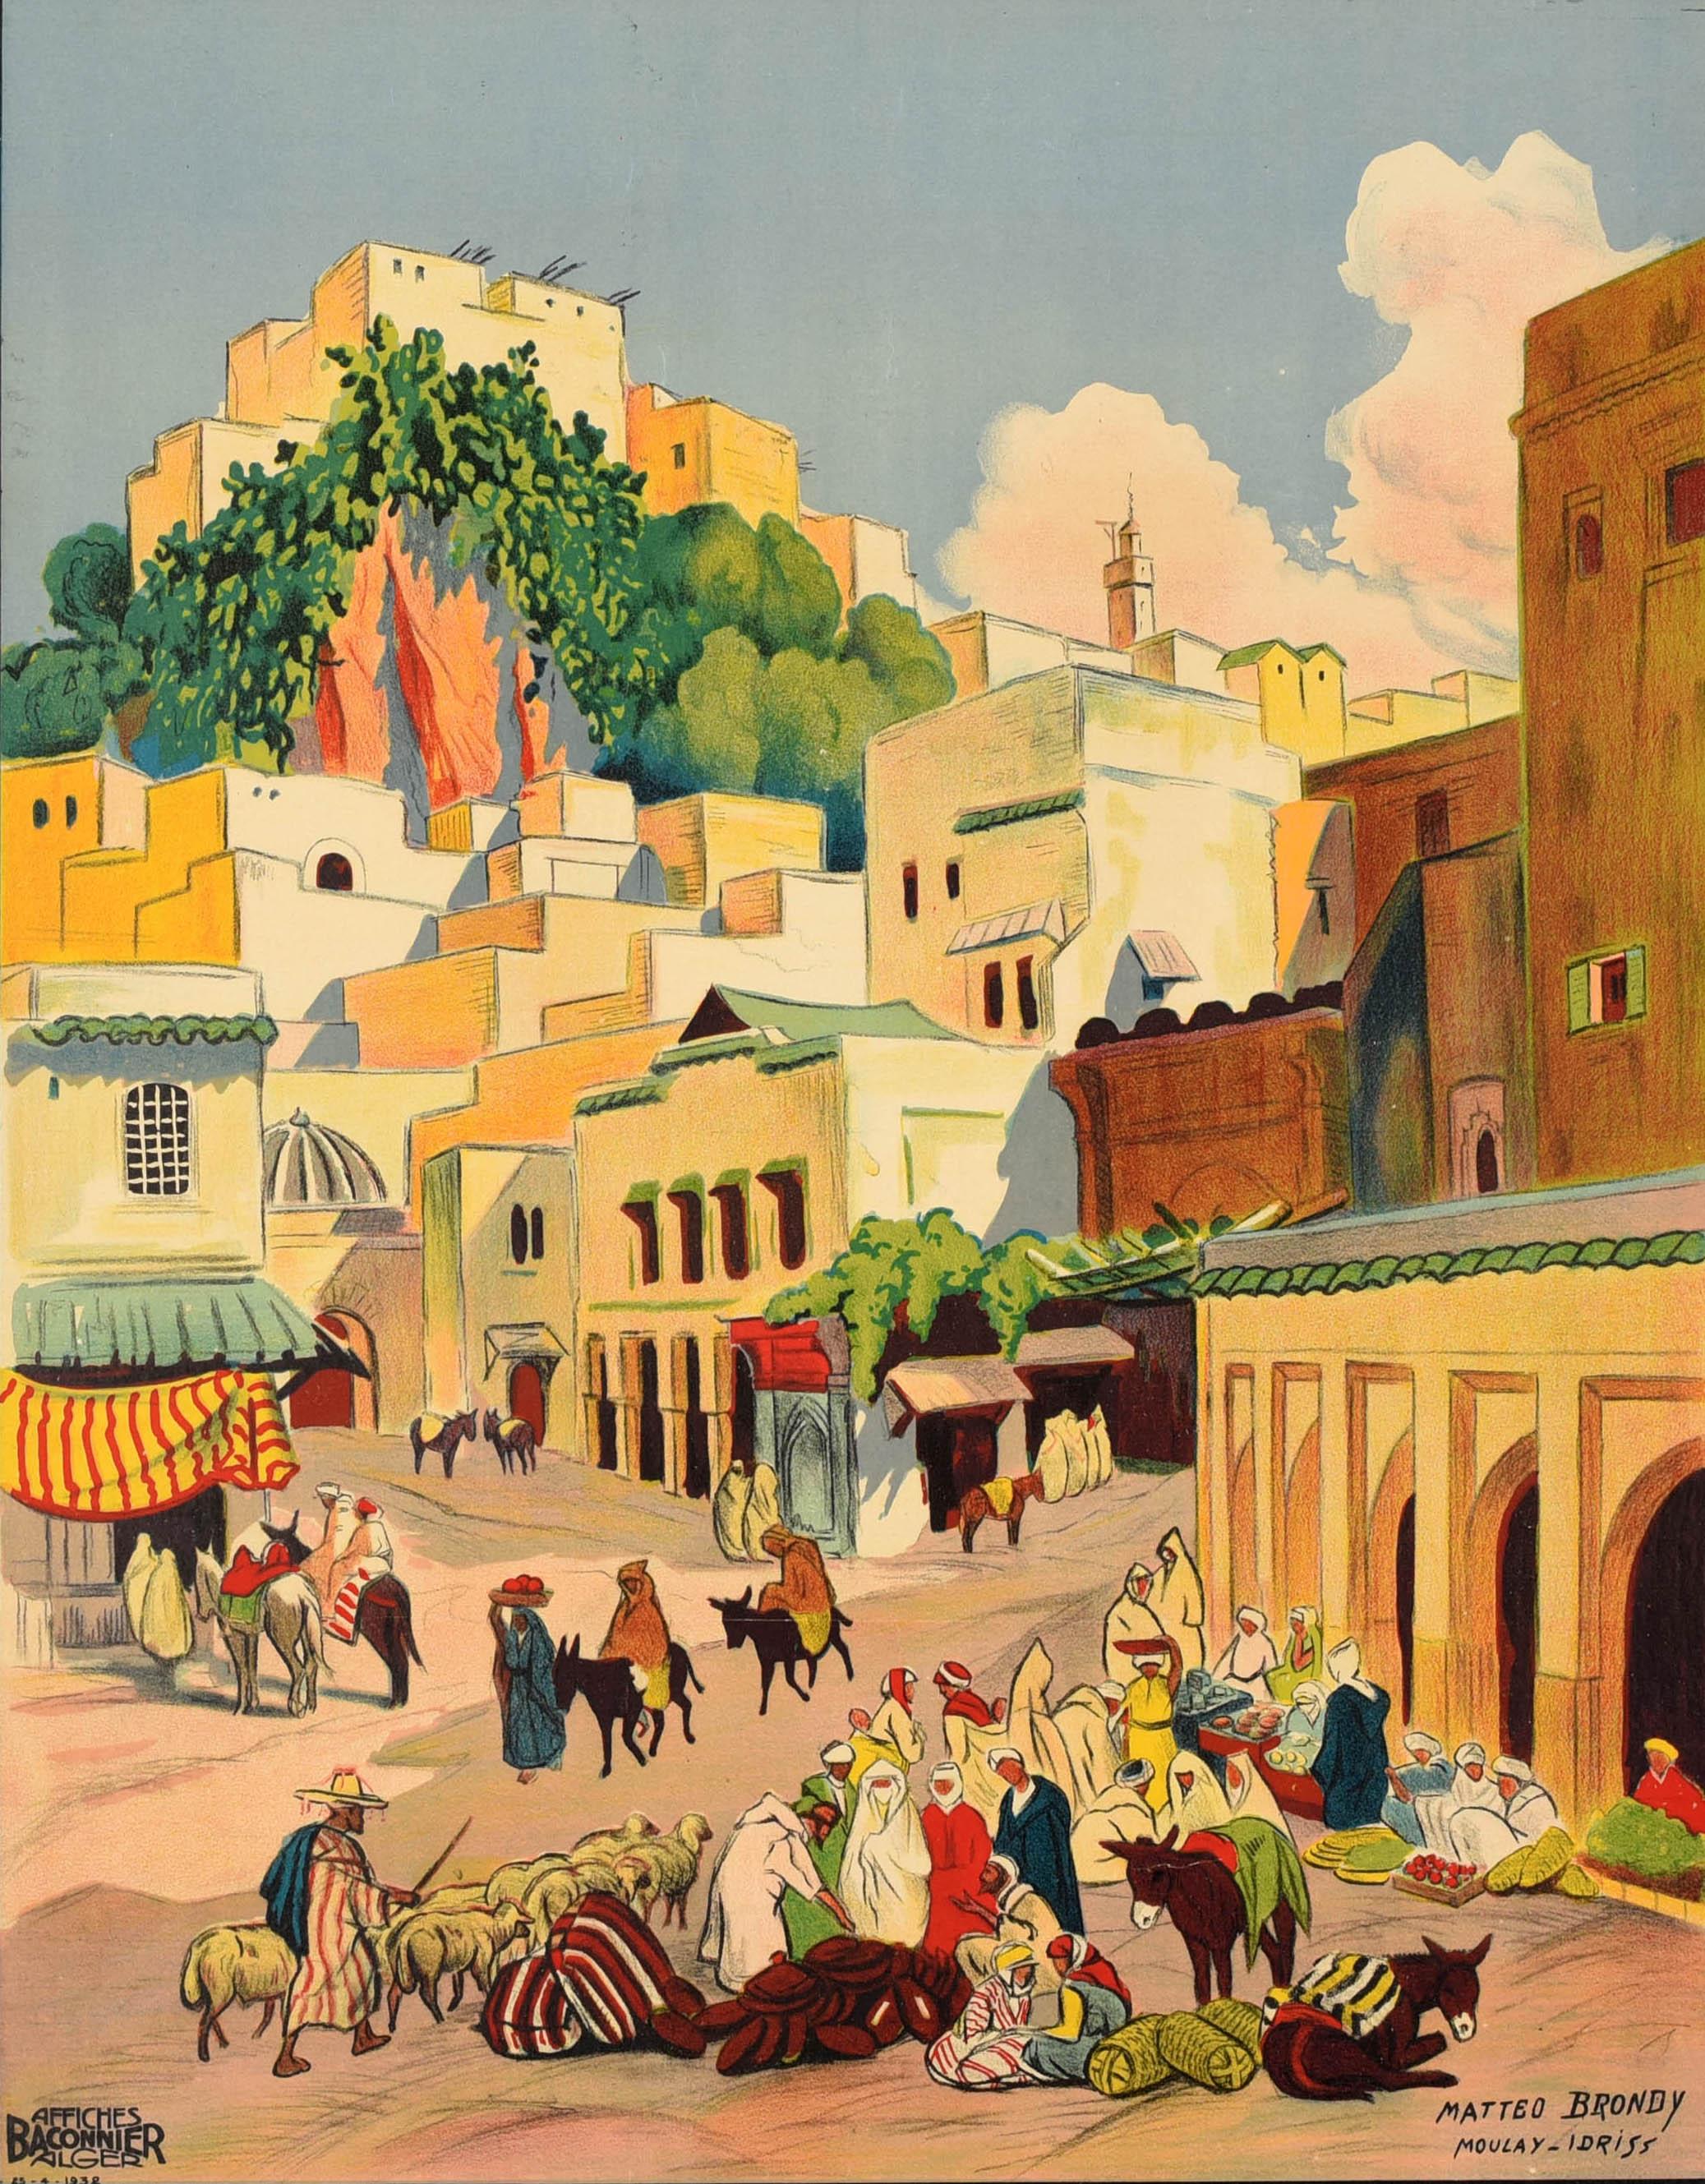 Original vintage travel poster issued by the PLM Paris Lyon Mediterranee railway for Moulay Idriss The Holy City Of Djebel Zerhoun featuring a colourful view of people walking along the hill town streets with a man shepherding a flock of sheep by a